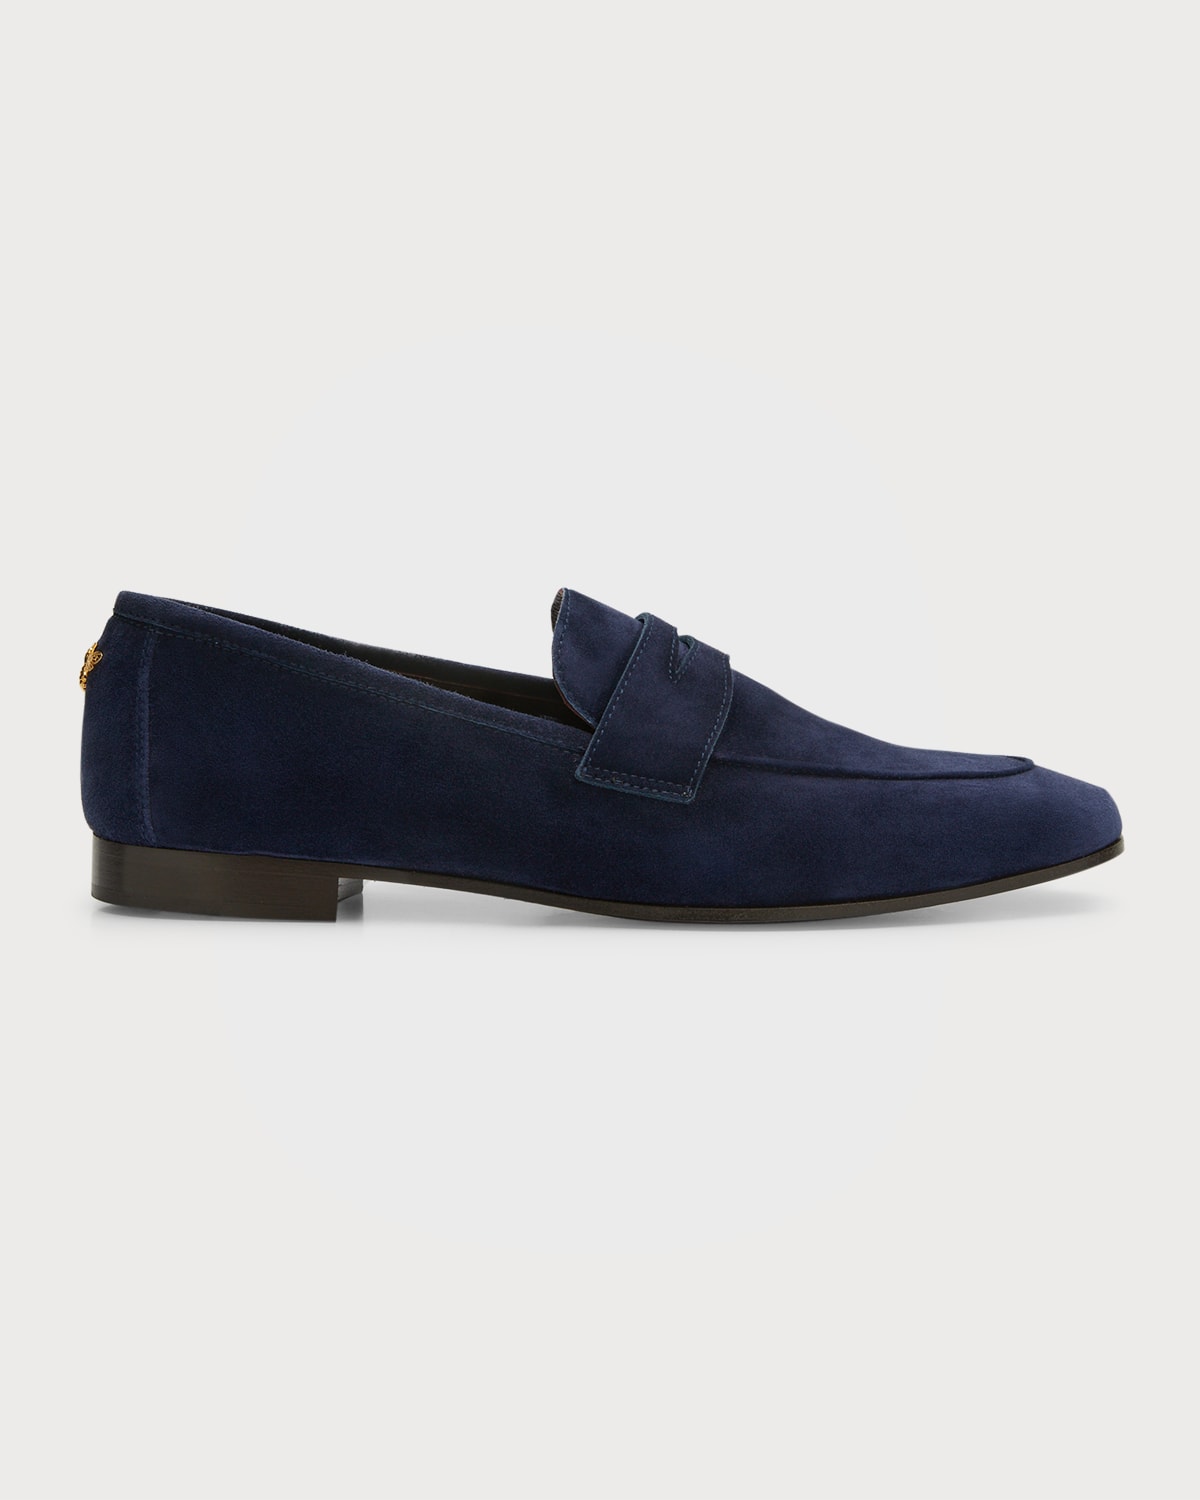 BOUGEOTTE SUEDE SLIP-ON PENNY LOAFER, NAVY